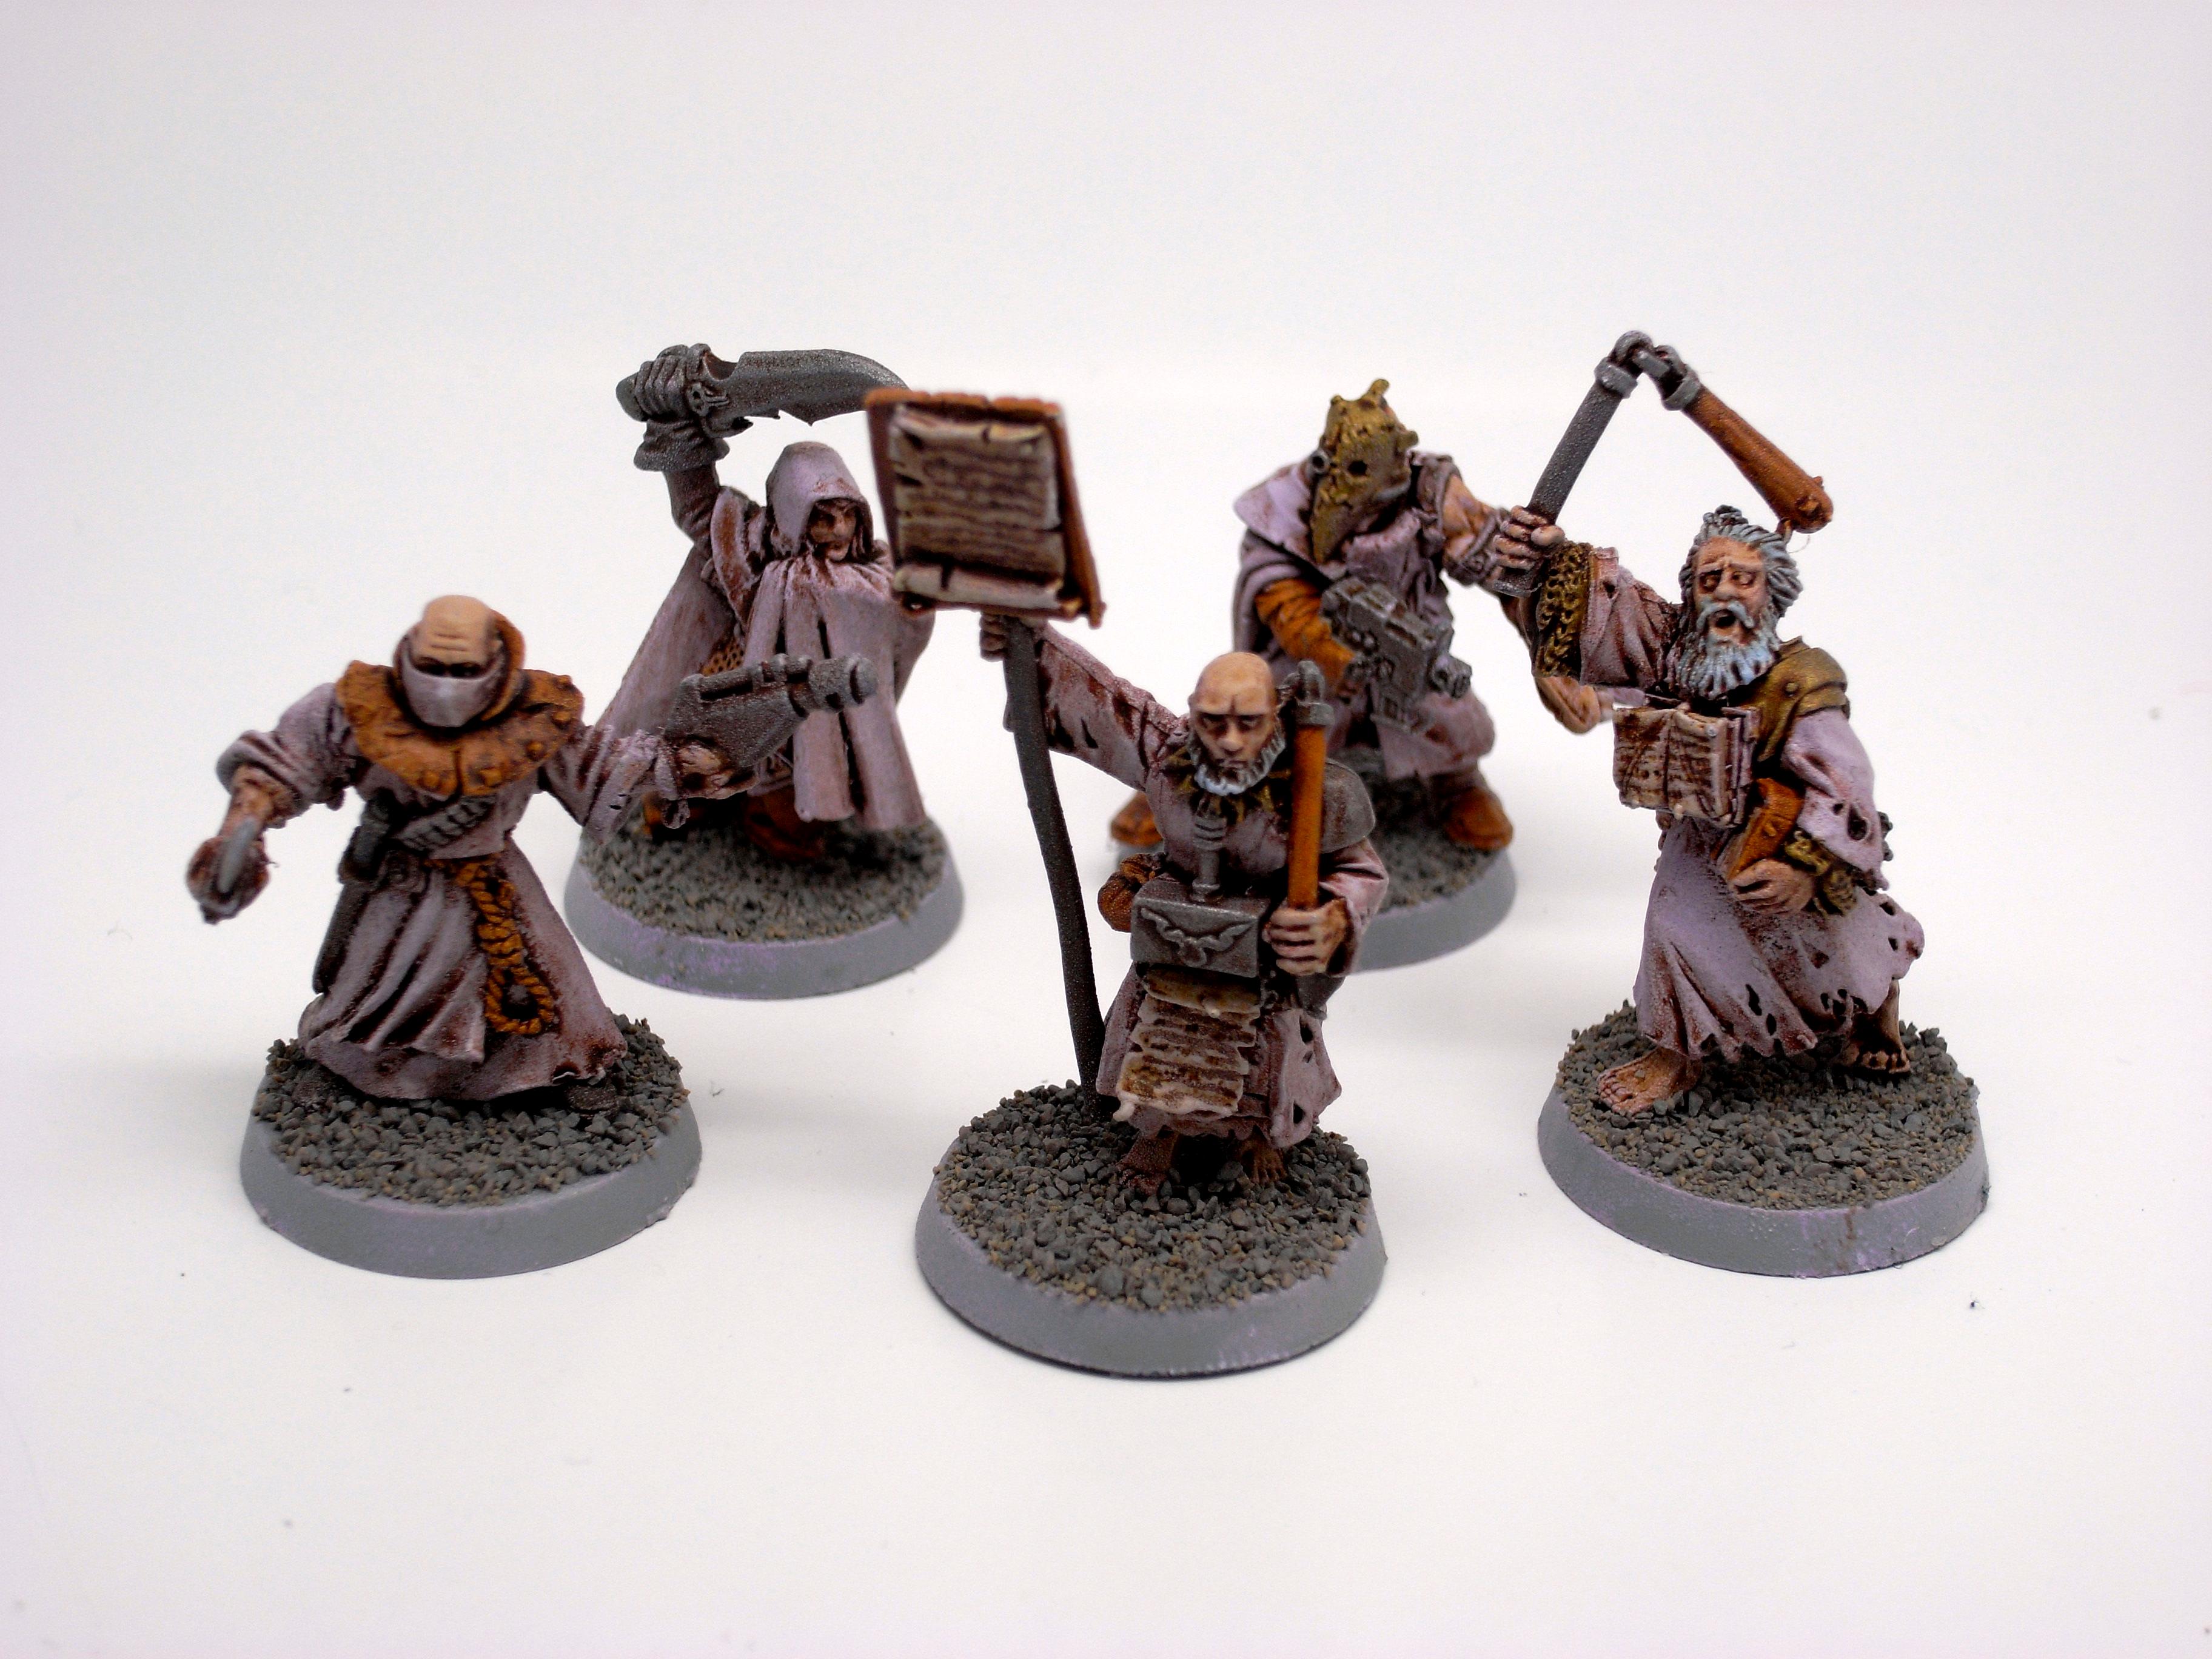 Additional Cultists